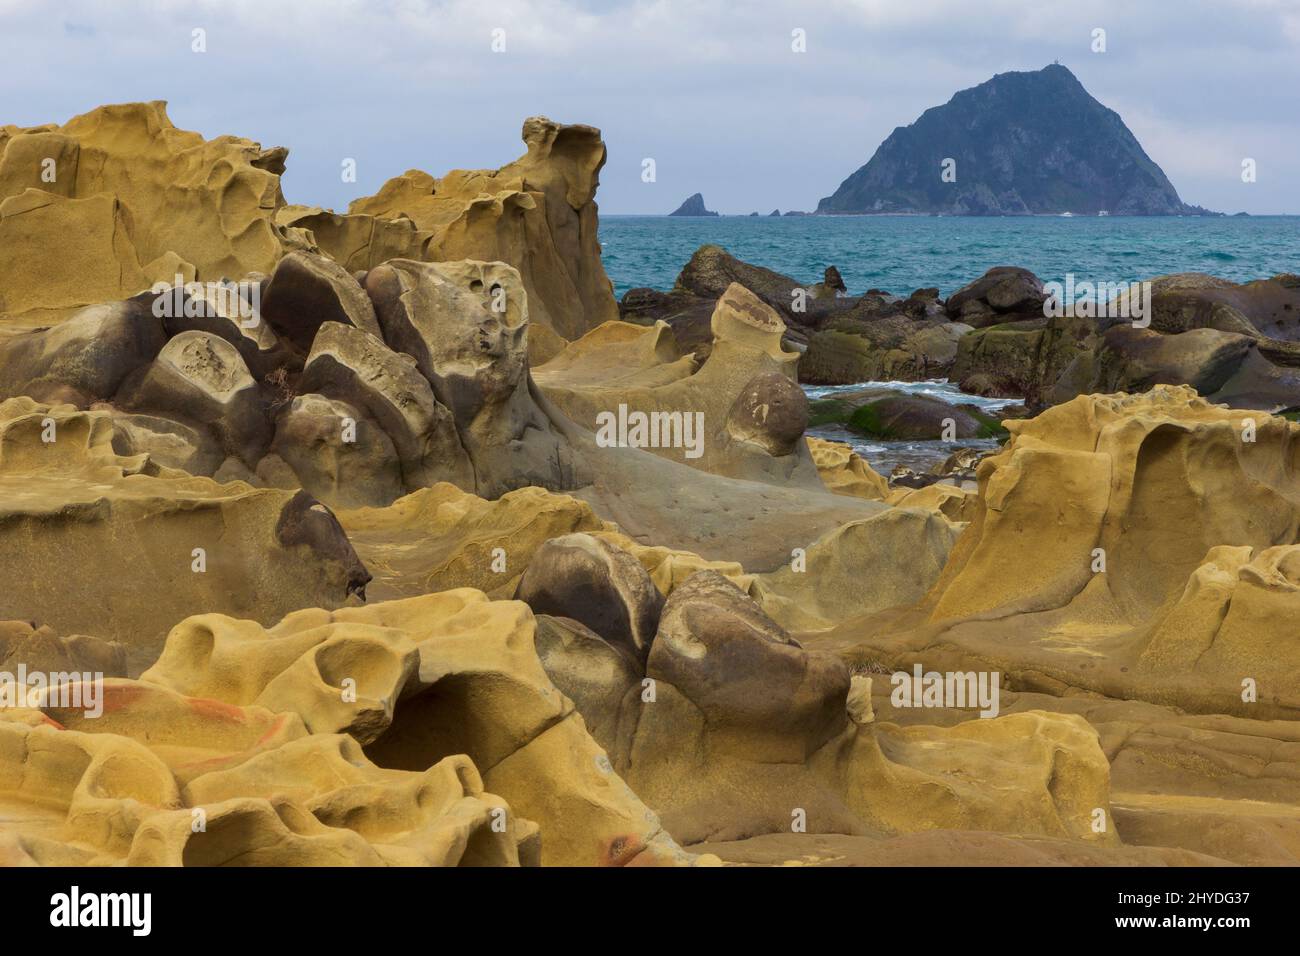 Bizarre rocky terrain and rock formations at the Heping (Hoping) Island Park (also known as Peace Island Park) in Keelung, Taiwan. Stock Photo